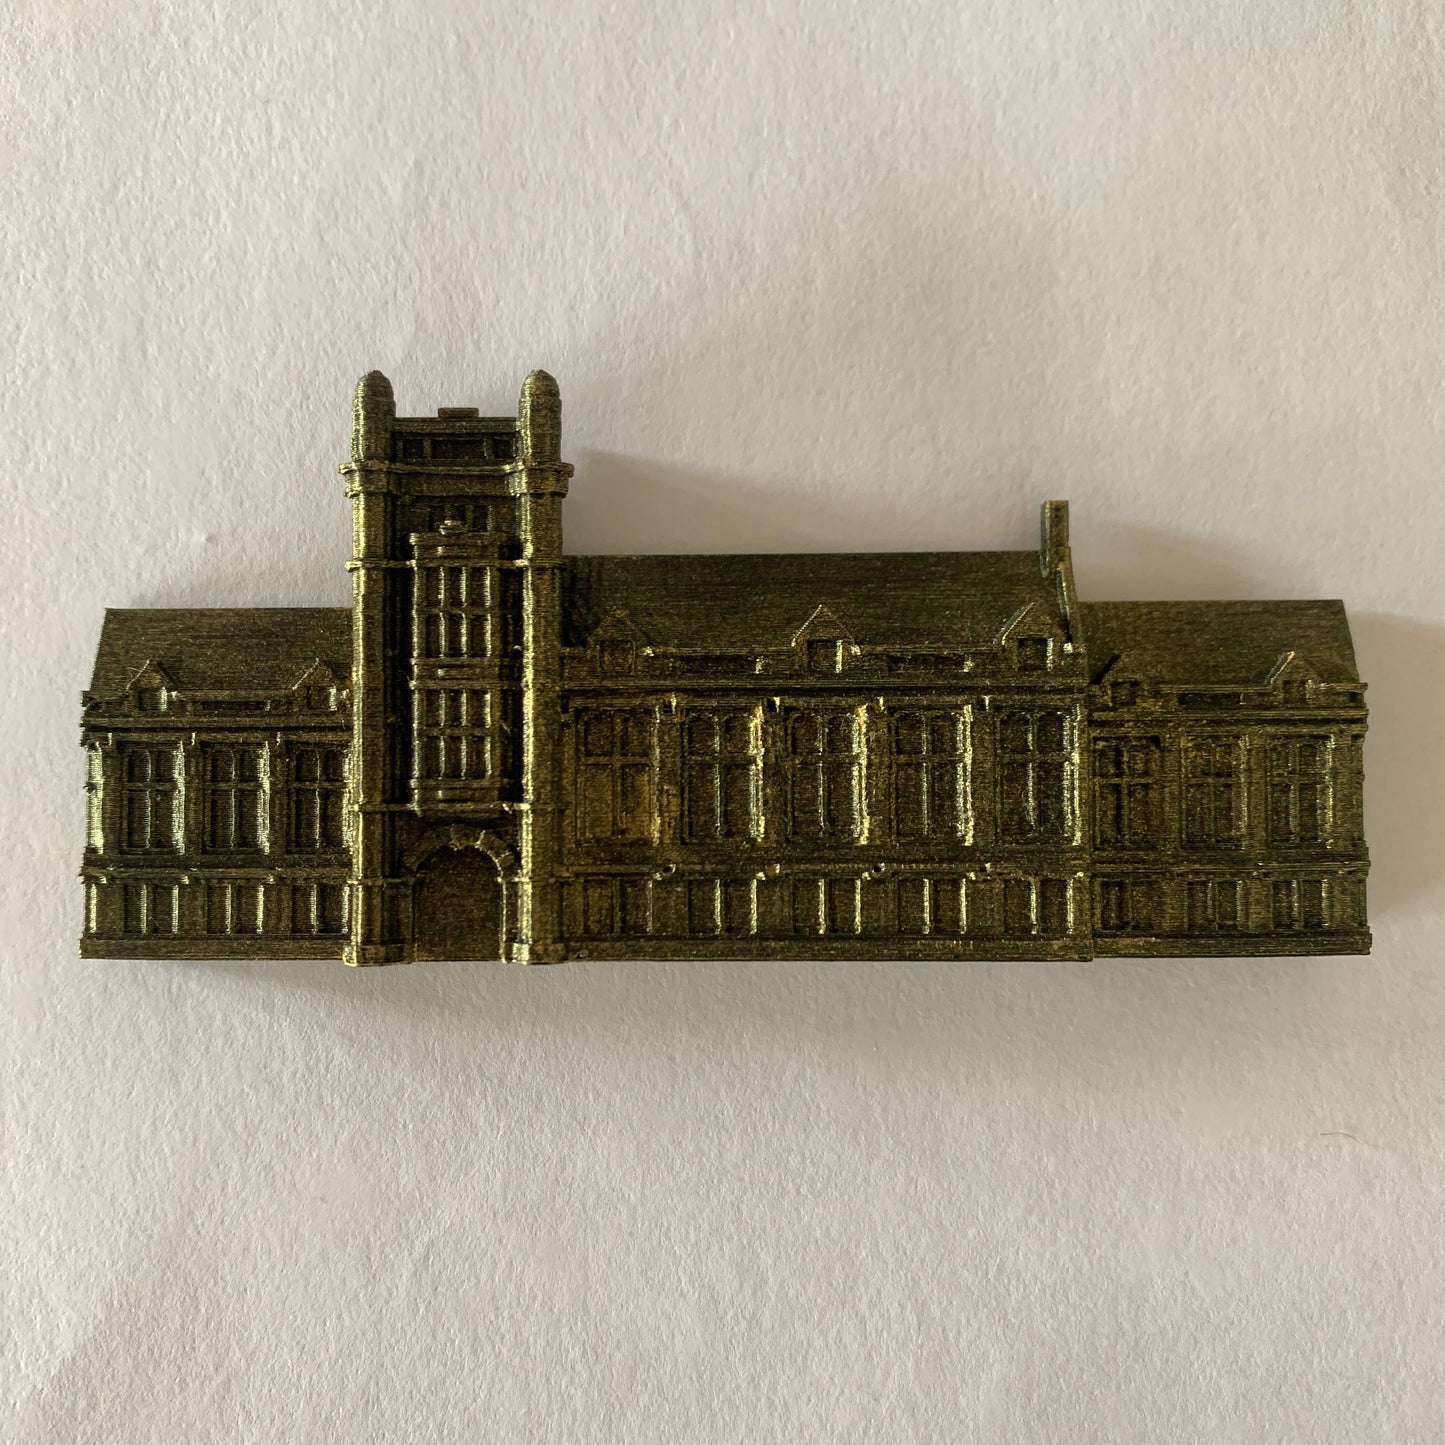 3D Printed Dearborn Magnets